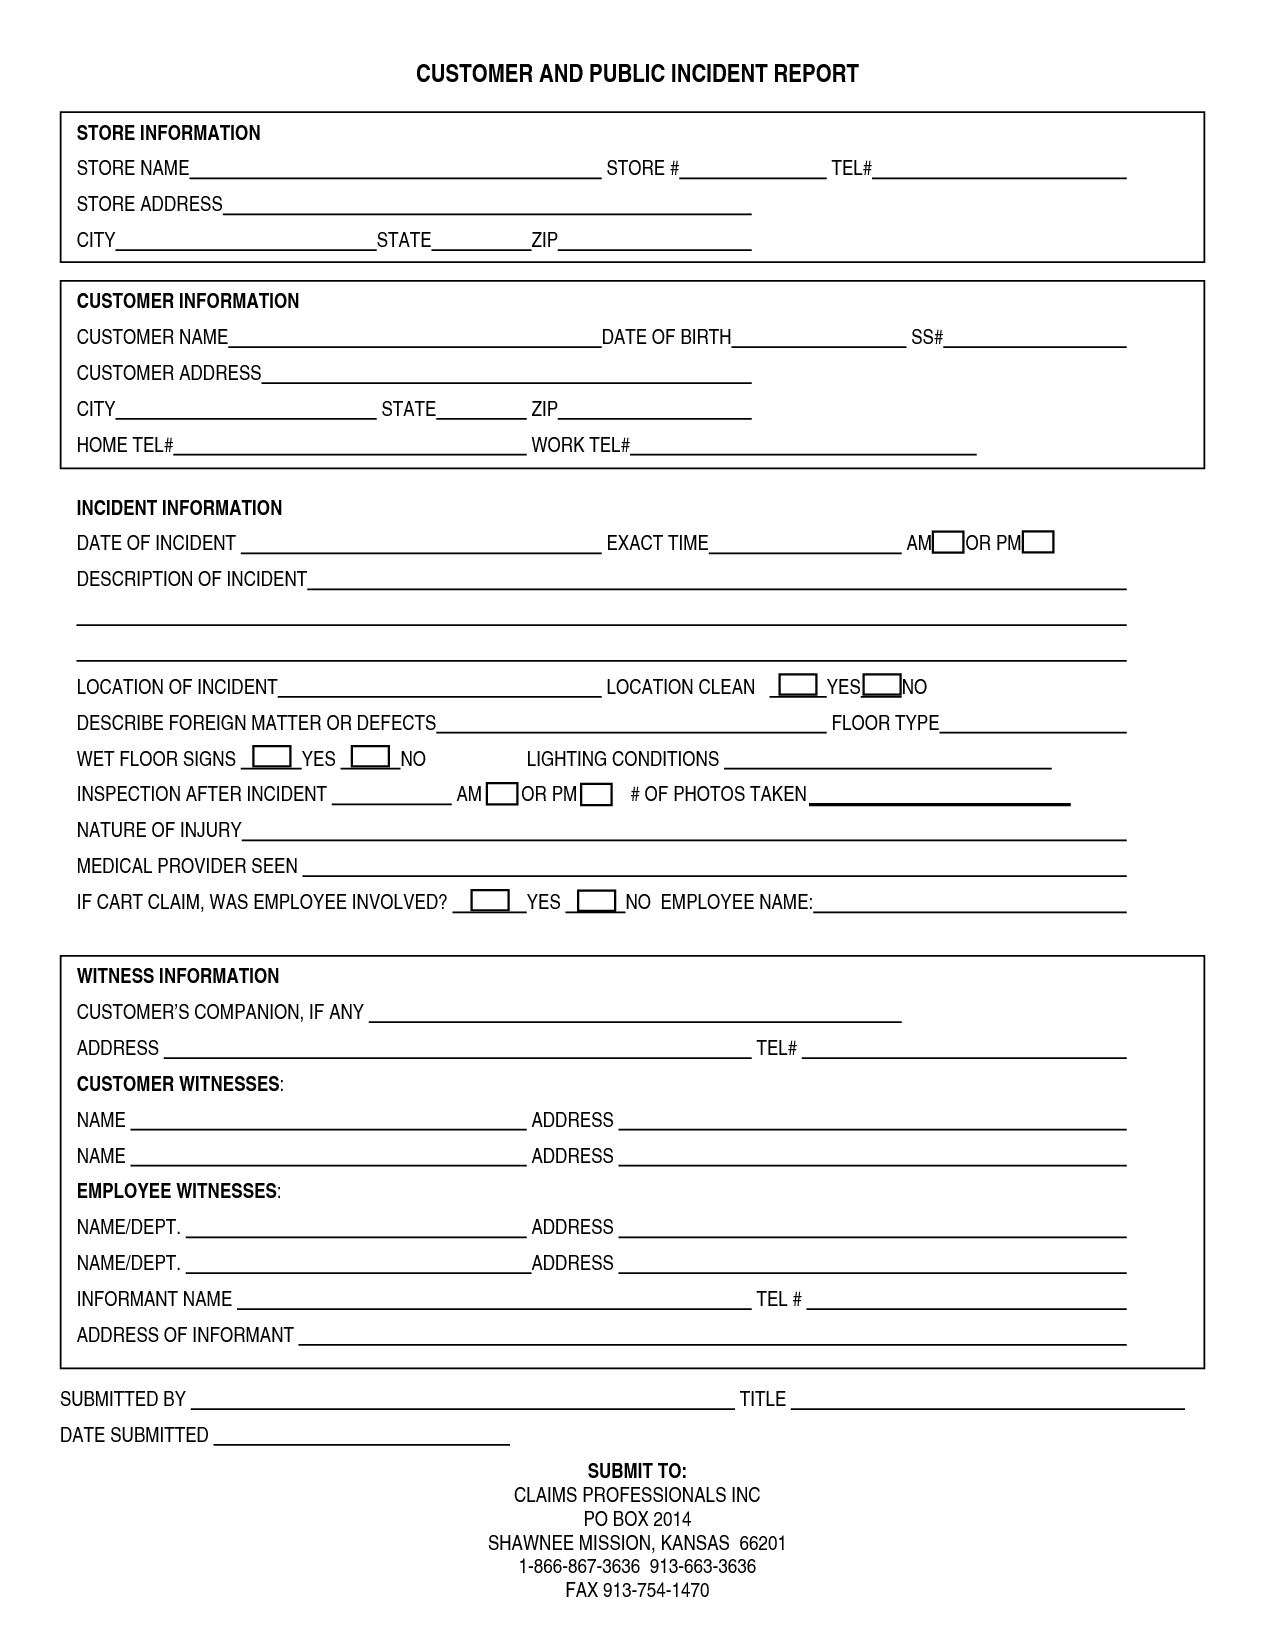 Images Of Customer Accident Report Template  Krydia pertaining to Customer Incident Report Form Template